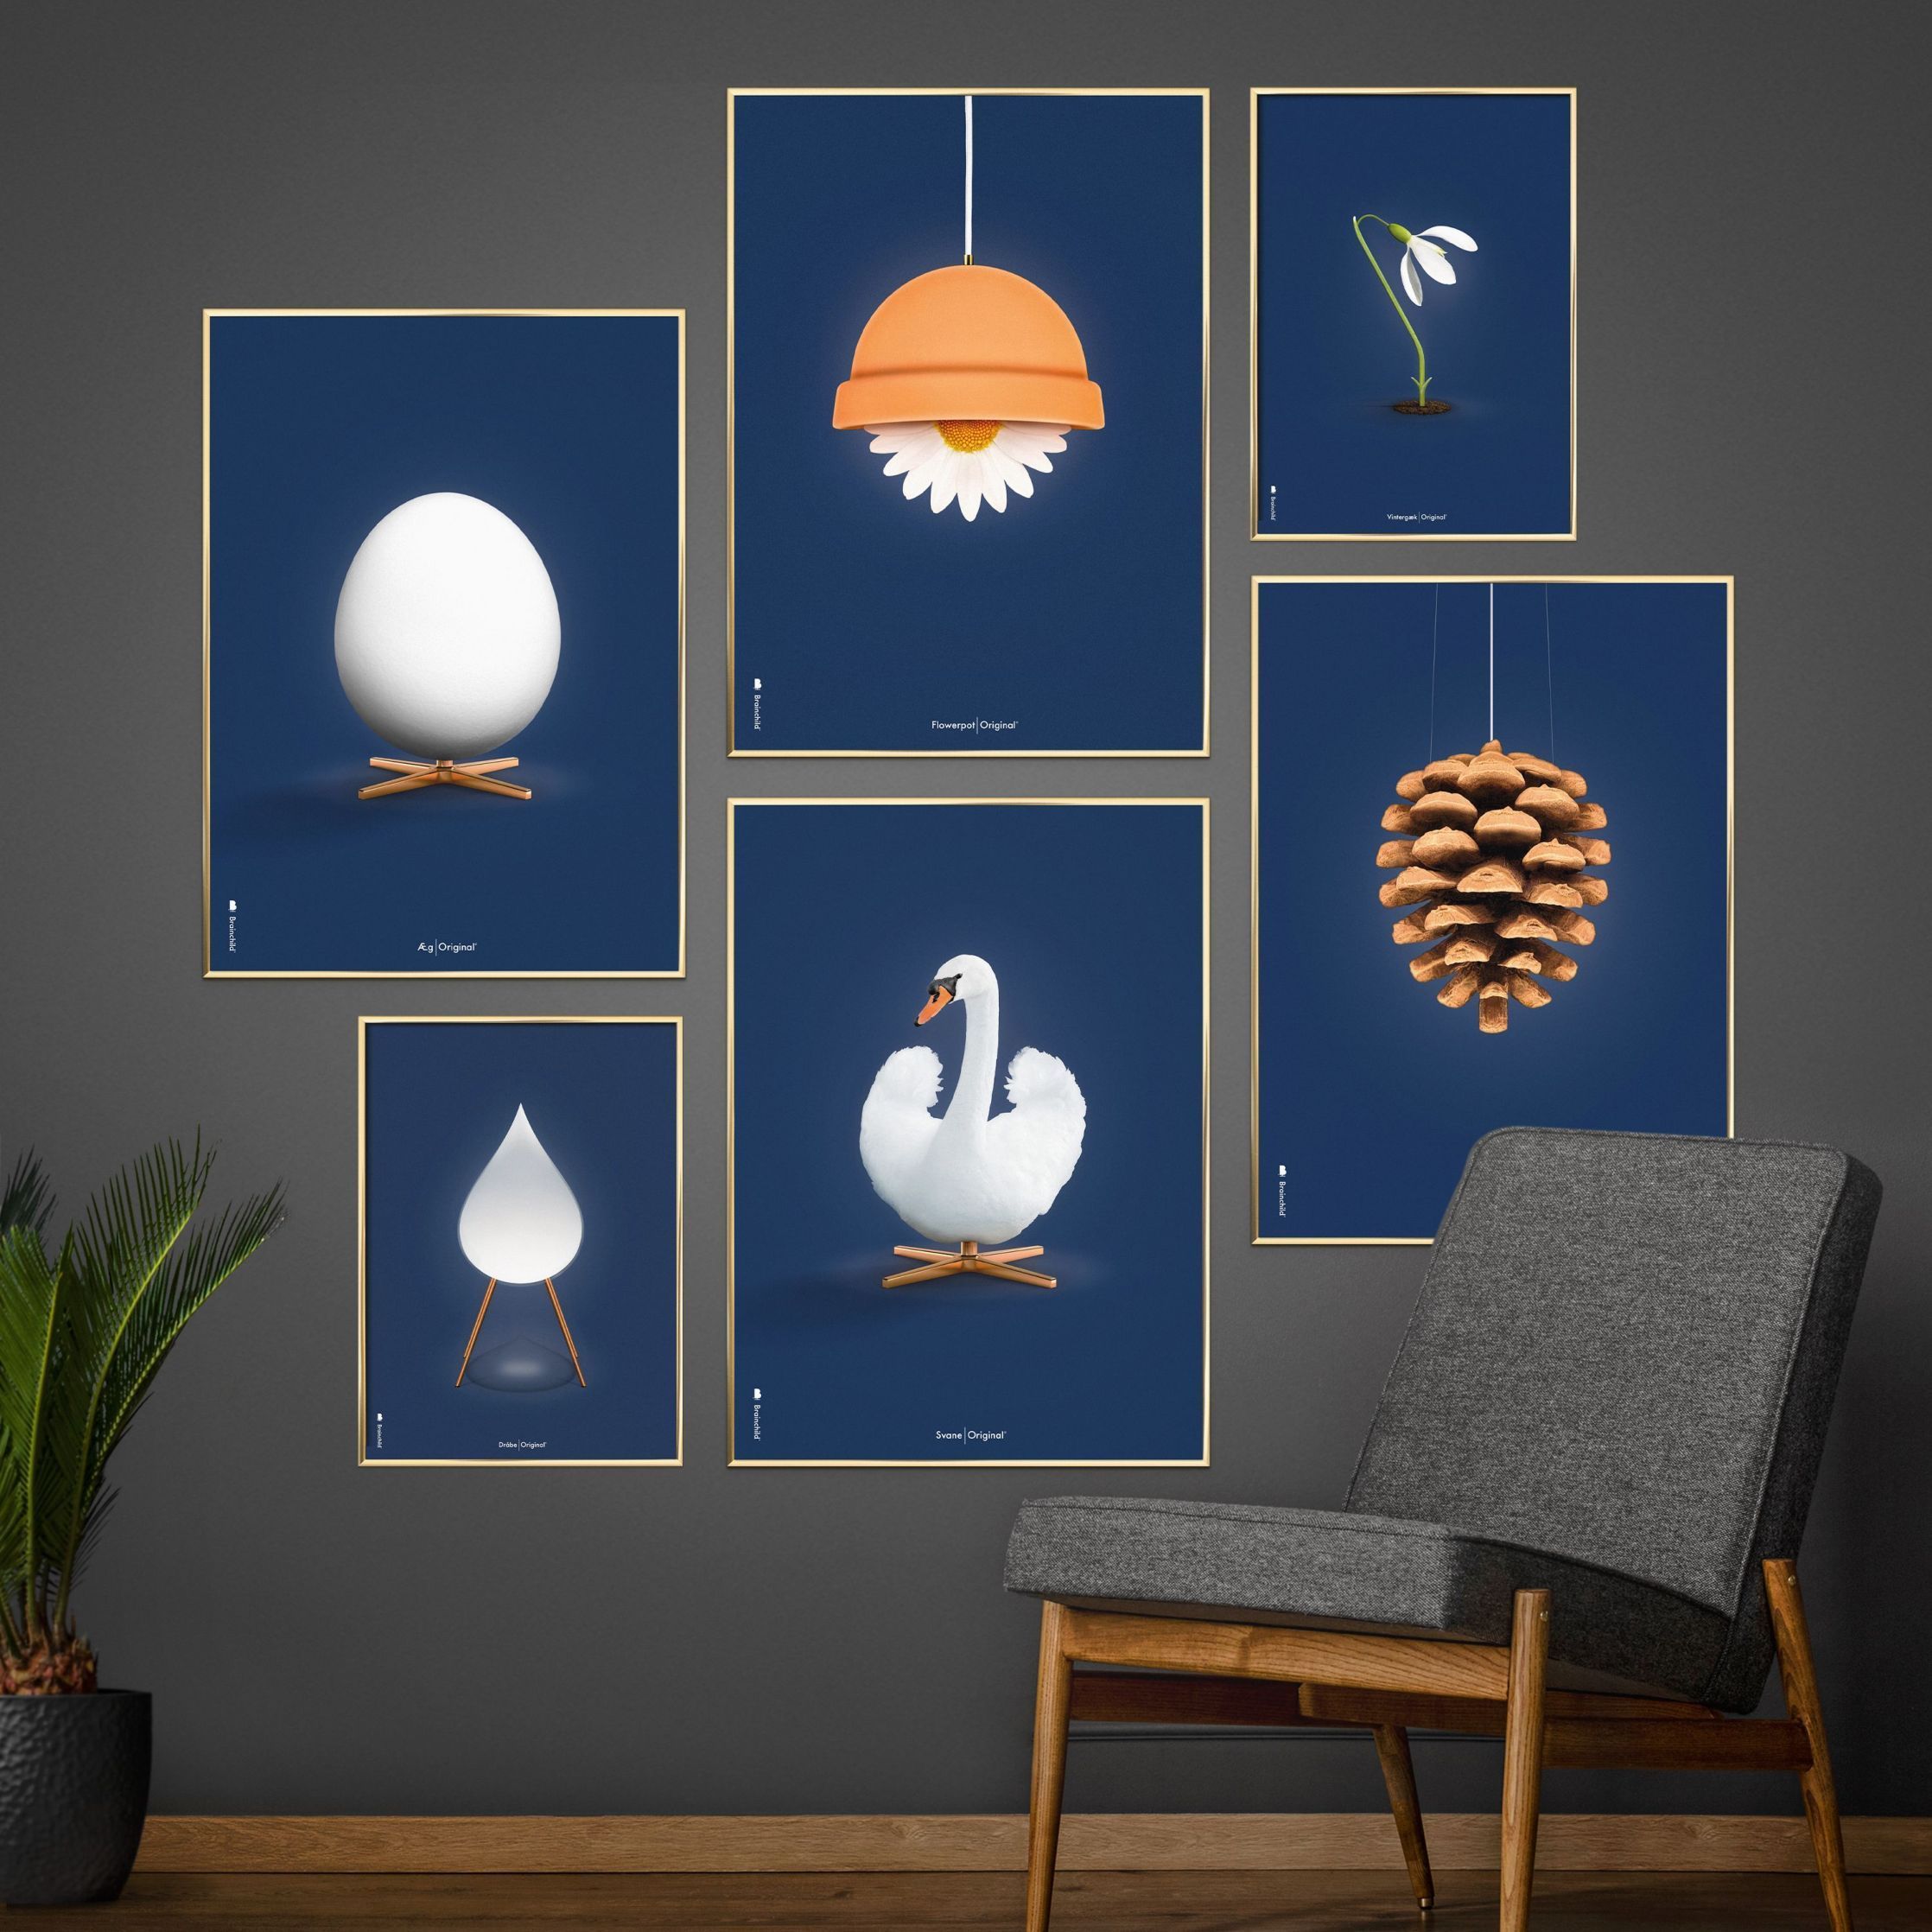 Brainchild Pine Cone Classic Poster, Frame In Black Lacquered Wood A5, Dark Blue Background